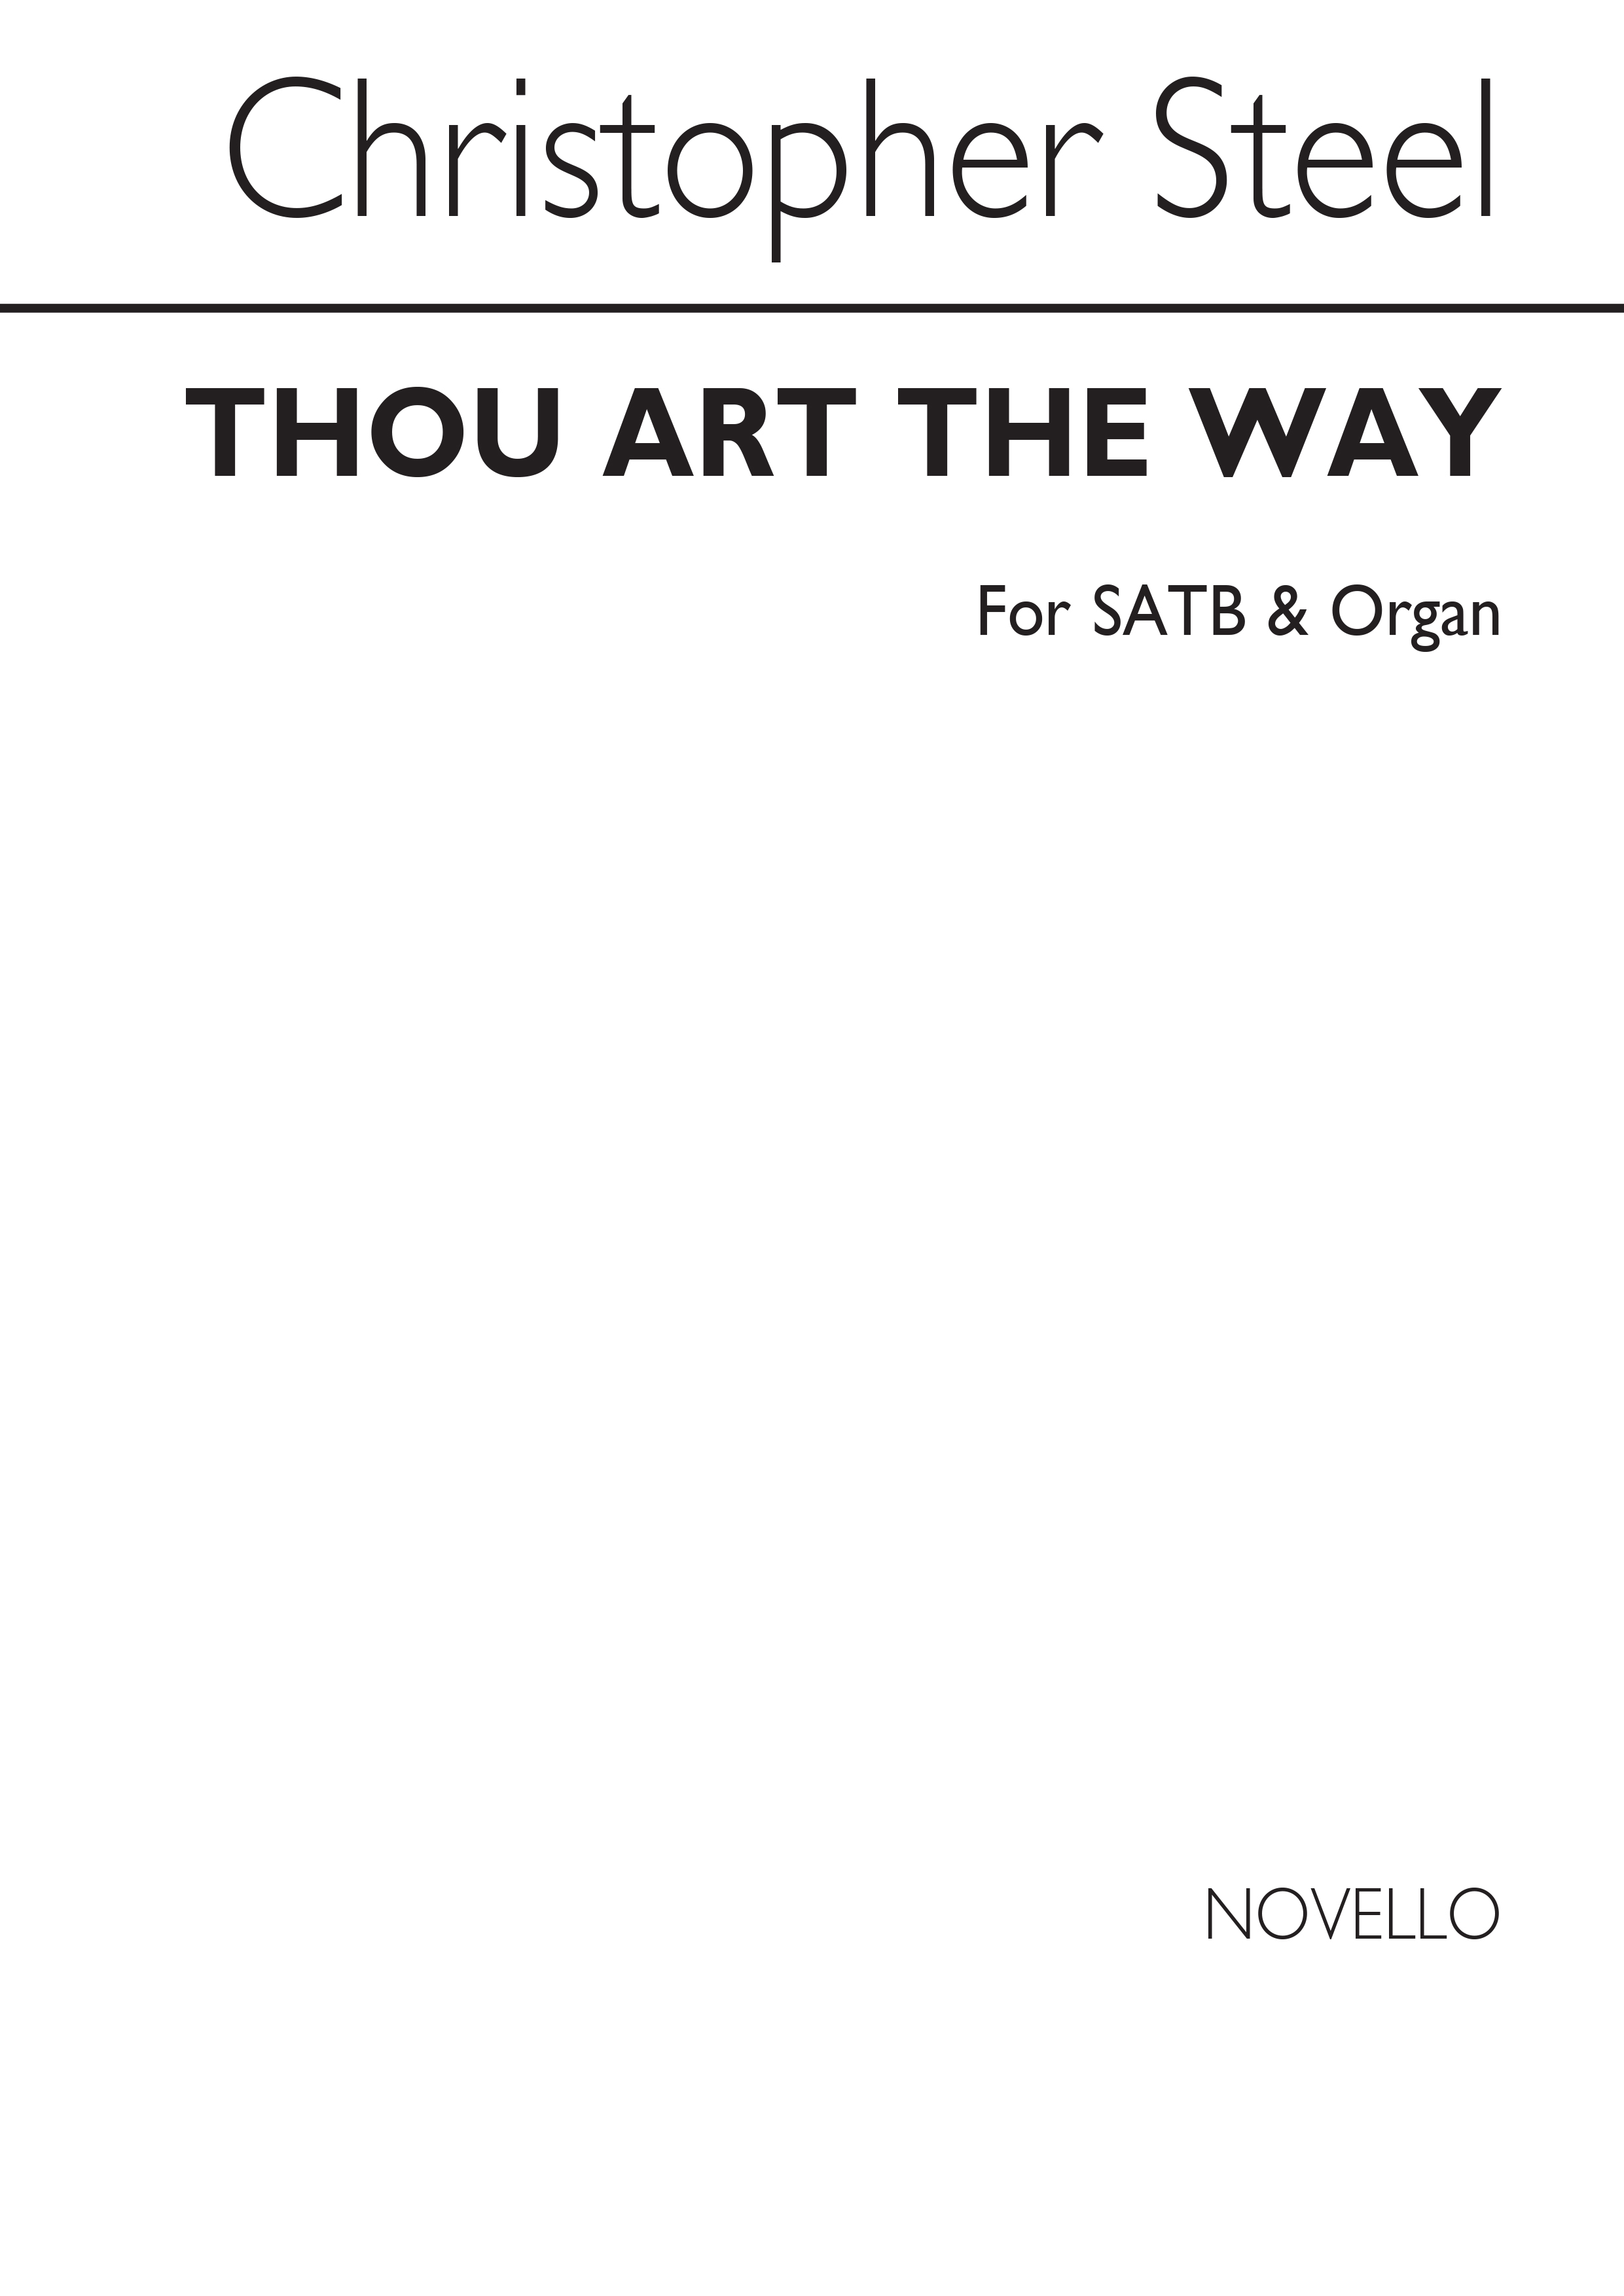 Steel: Thou Art The Way for SATB Chorus with Organ acc.